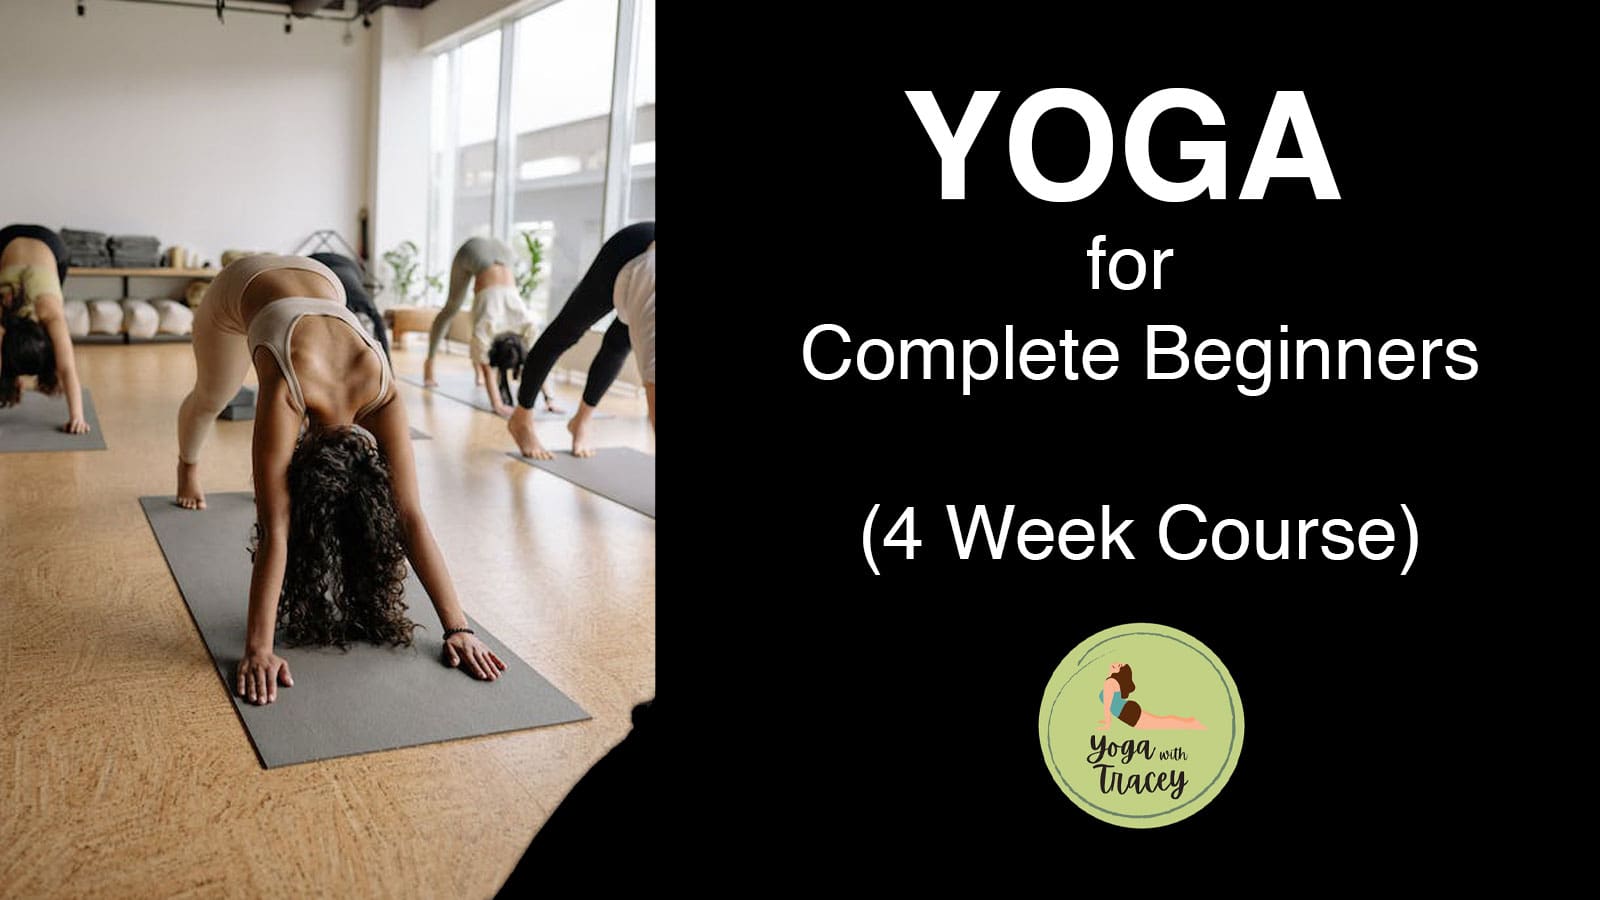 Complete Beginners 4 Week Course by Yoga with Tracey - Thetford Bubbly Hub